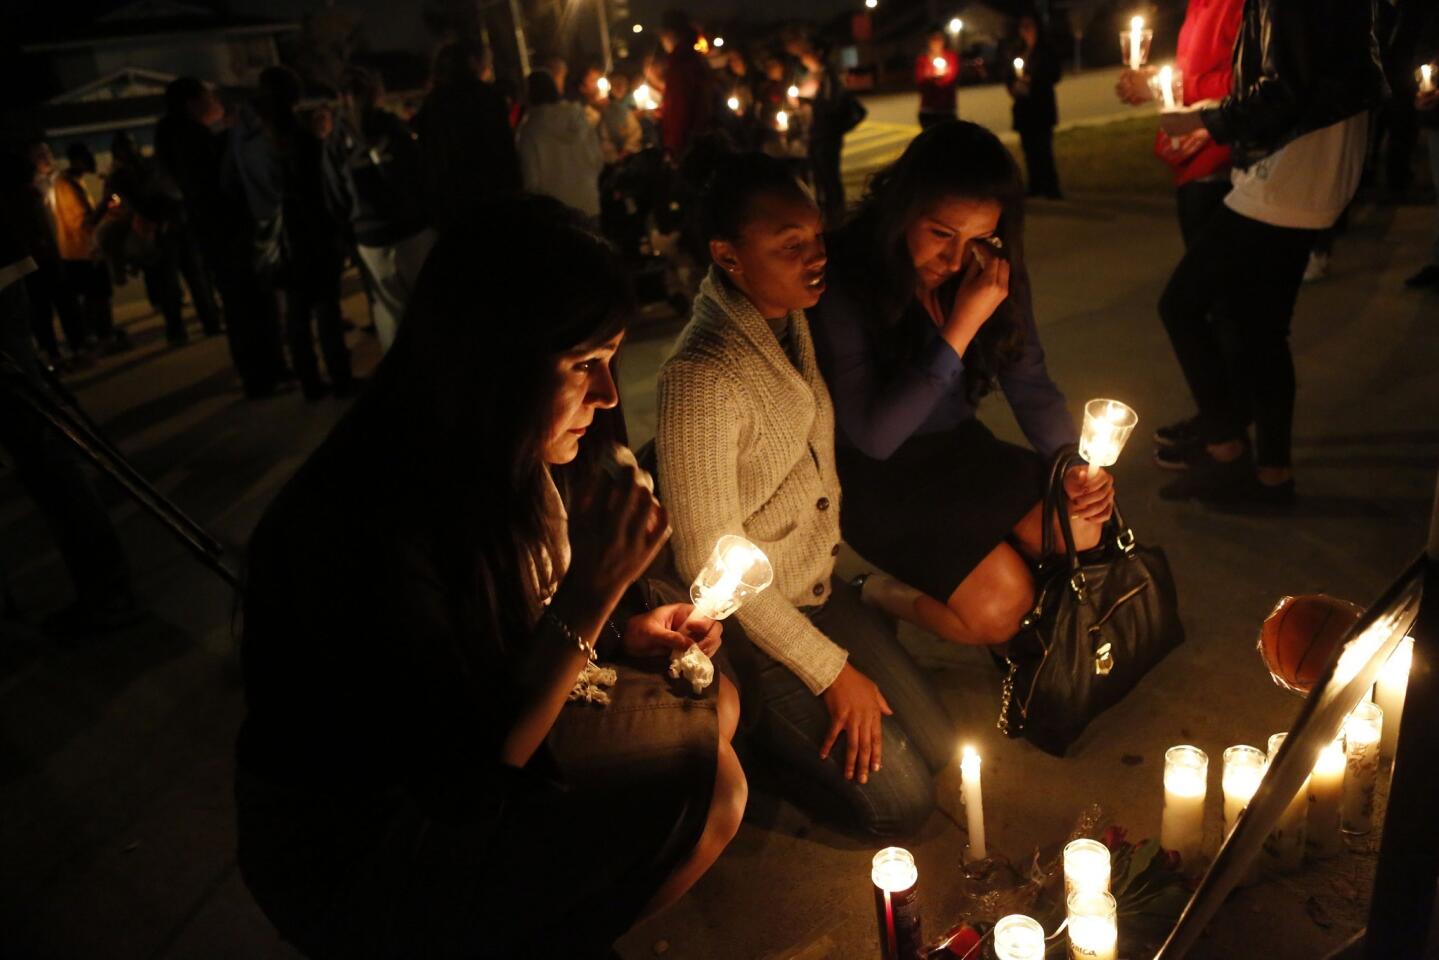 Monica Quan's basketball teammate and friend, Julie Escalera, left, sits with Germita Haynie, center, and Stephanie Escalera as they pay their respects in front of candles and photos of the slain basketball coach.